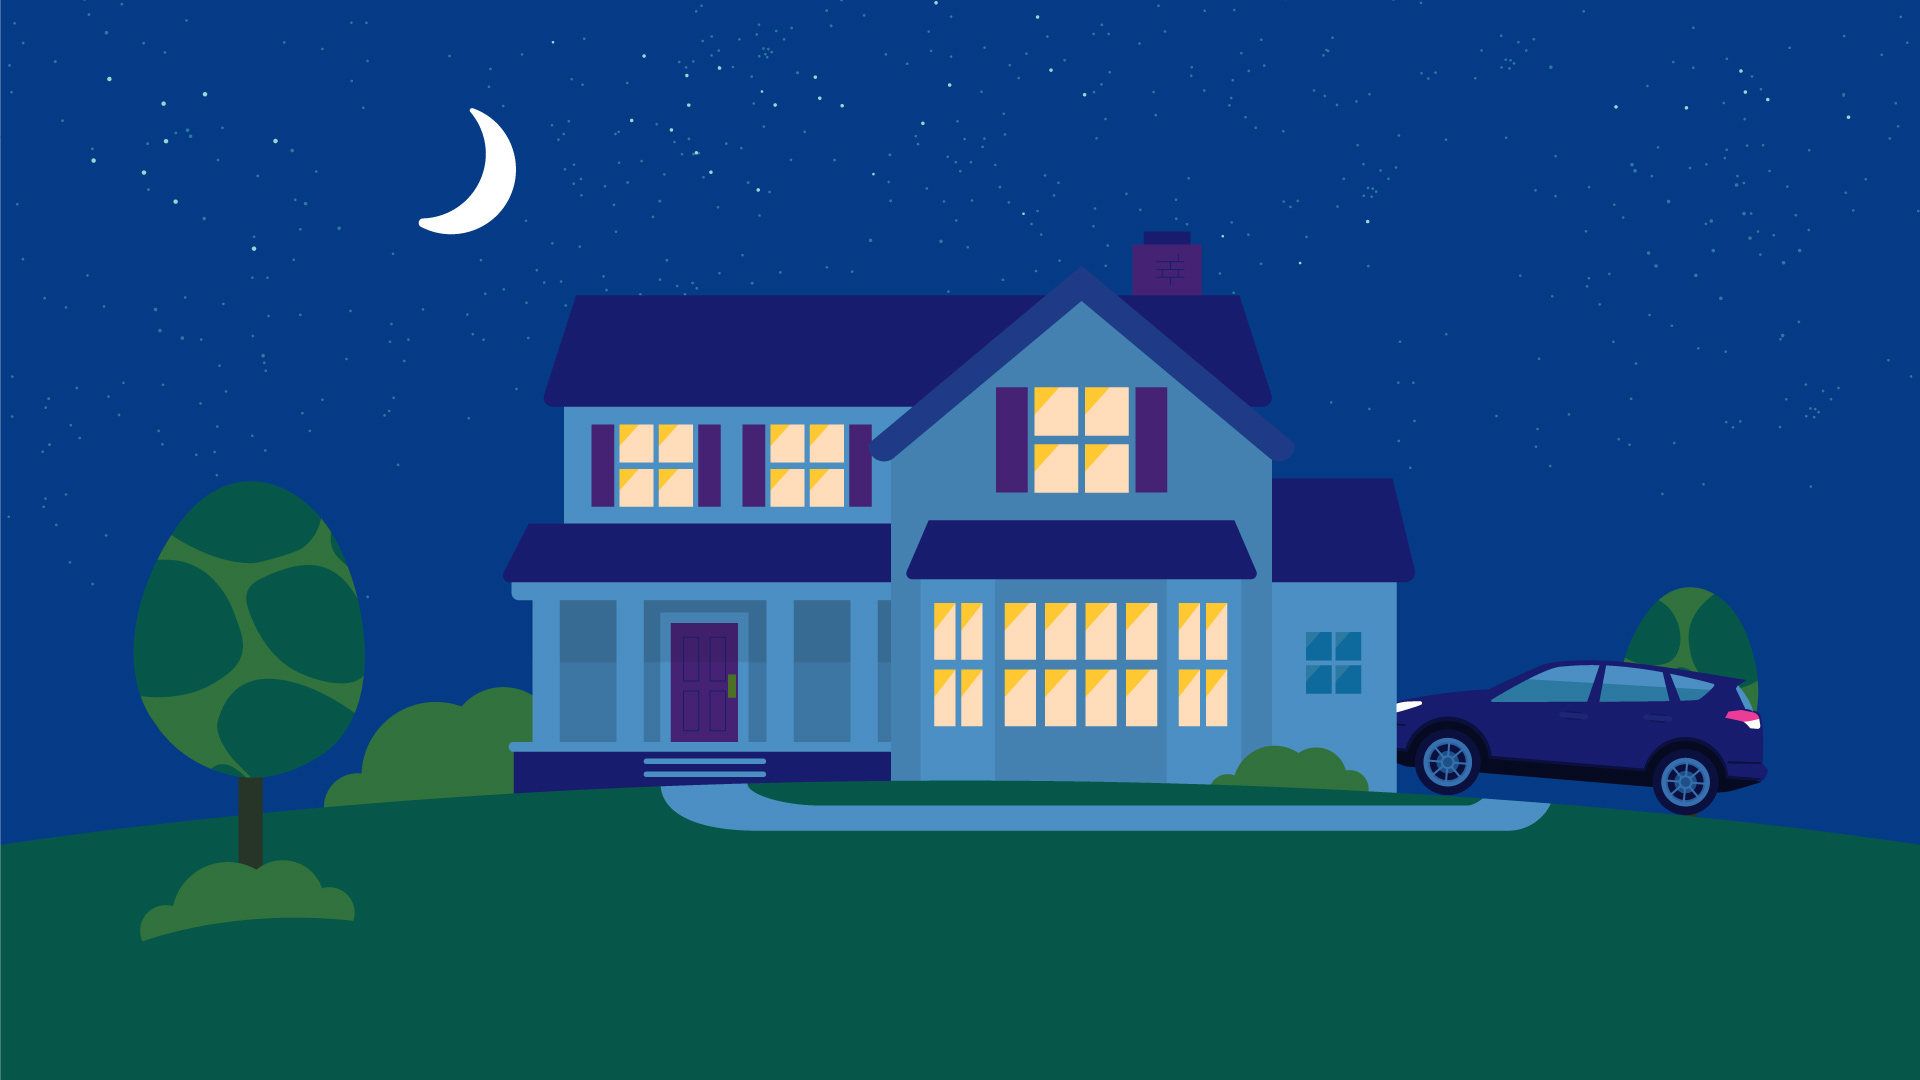 colorful house illustration with trees and night sky with moon